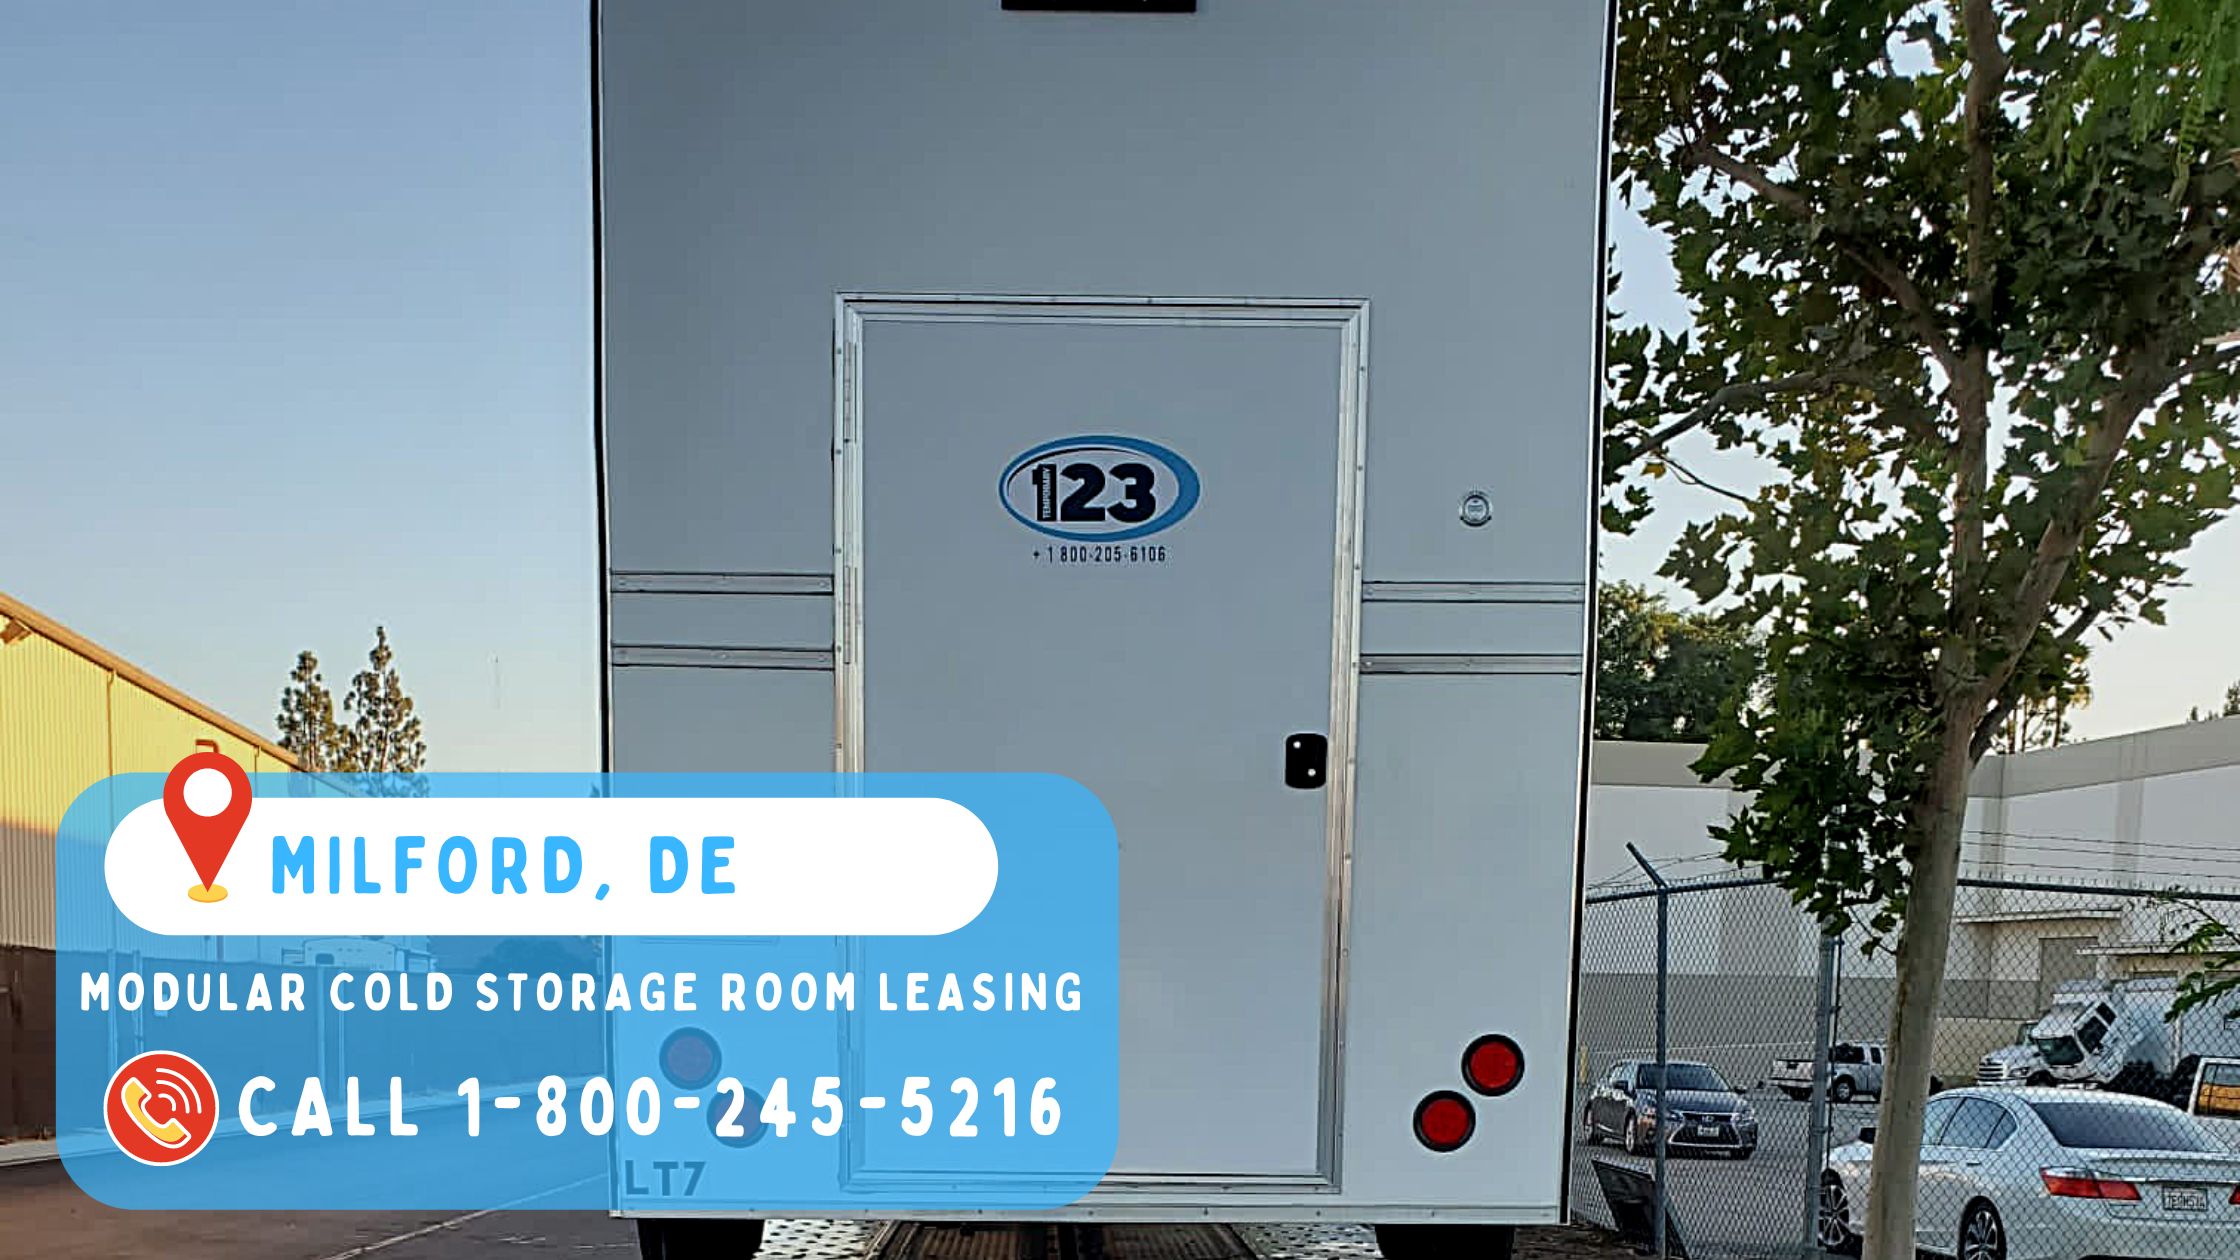 Modular Cold Storage Room Leasing in Milford